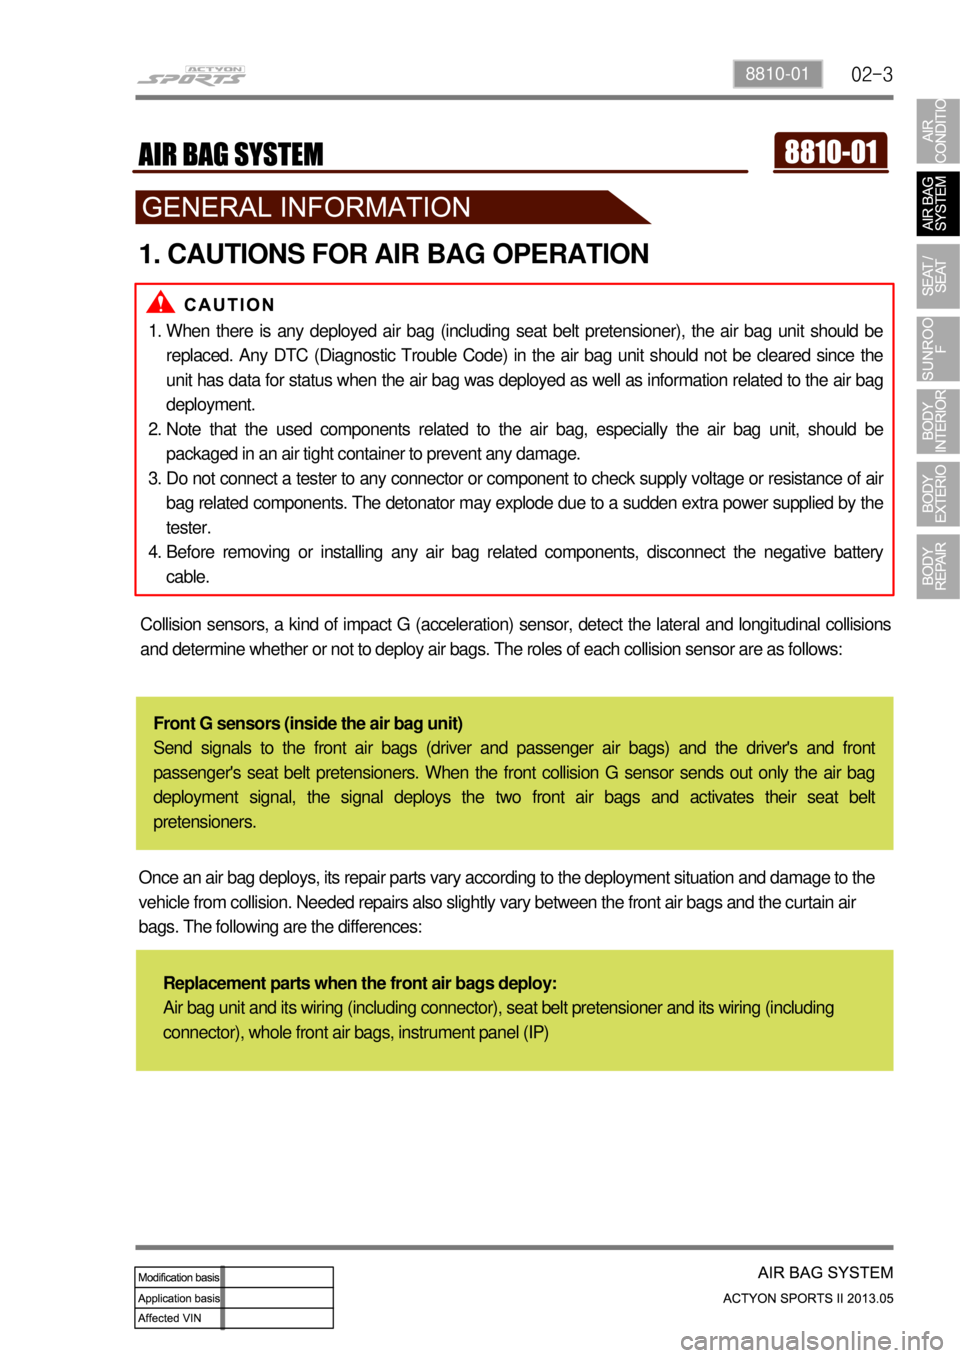 SSANGYONG NEW ACTYON SPORTS 2013  Service Manual 02-38810-01
1. CAUTIONS FOR AIR BAG OPERATION
When there is any deployed air bag (including seat belt pretensioner), the air bag unit should be 
replaced. Any DTC (Diagnostic Trouble Code) in the air 